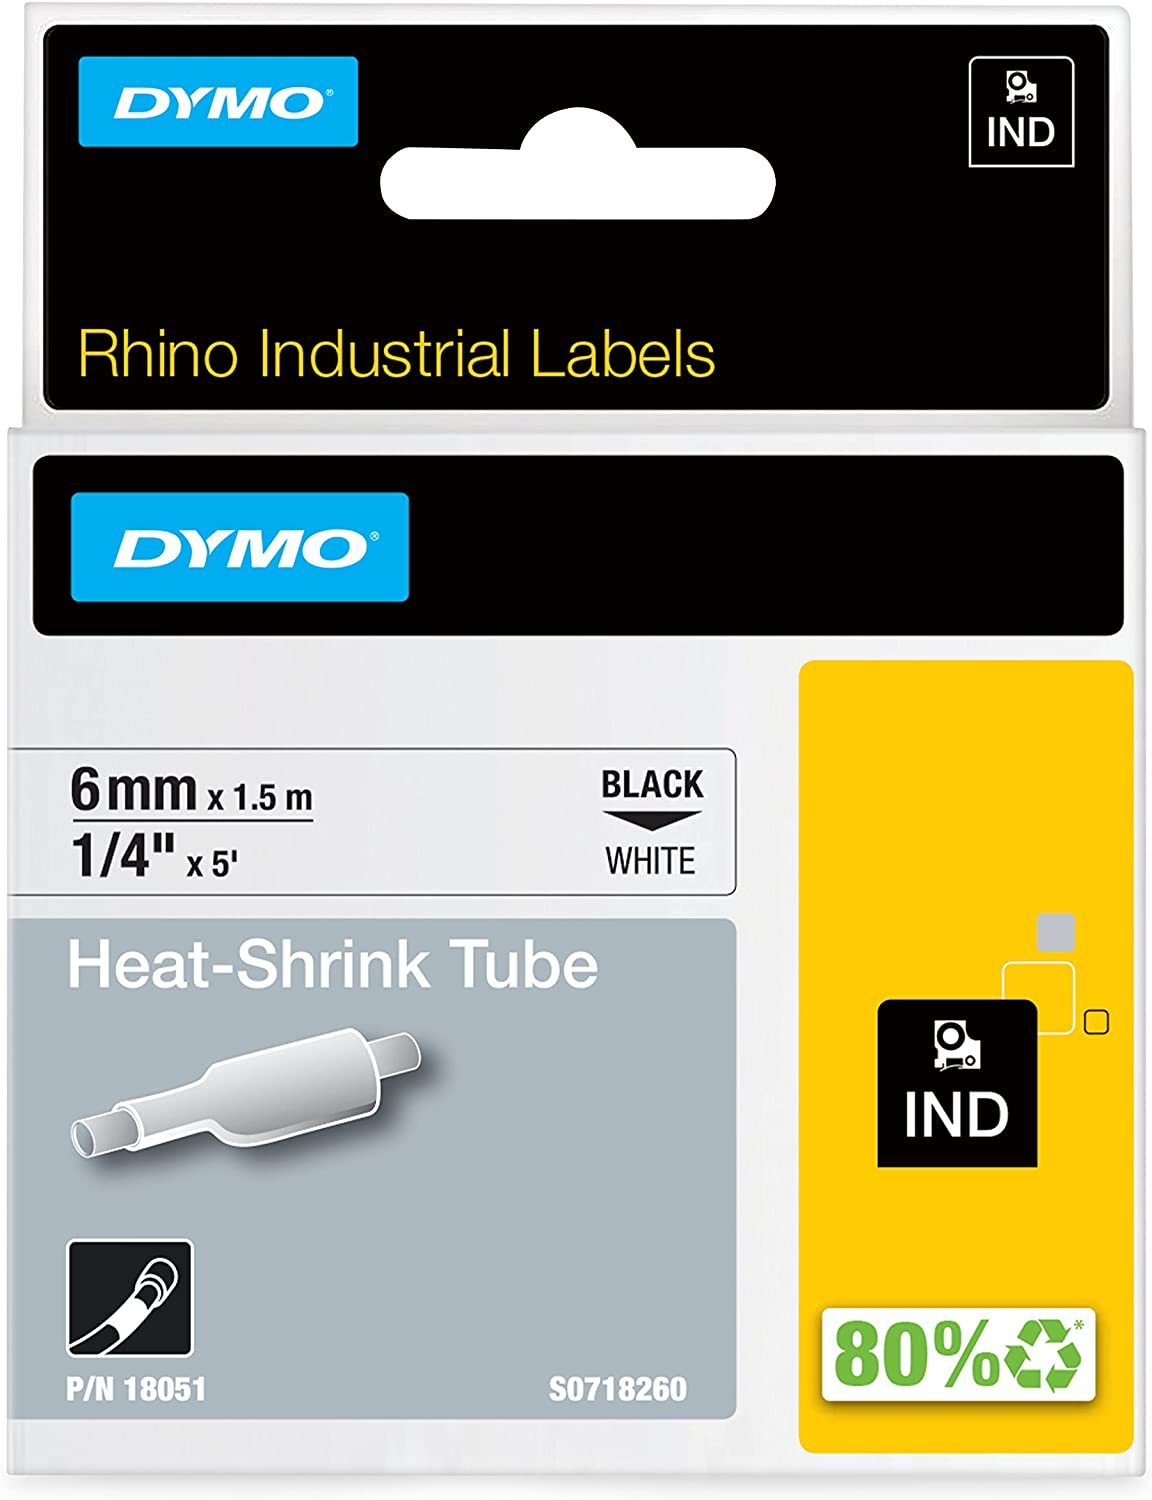 DYMO Industrial Heat Shrink Tubes for DYMO LabelWriter and Industrial Label Makers, Black on White, 1/4", (18051) Black on White 1/4" (6MM)